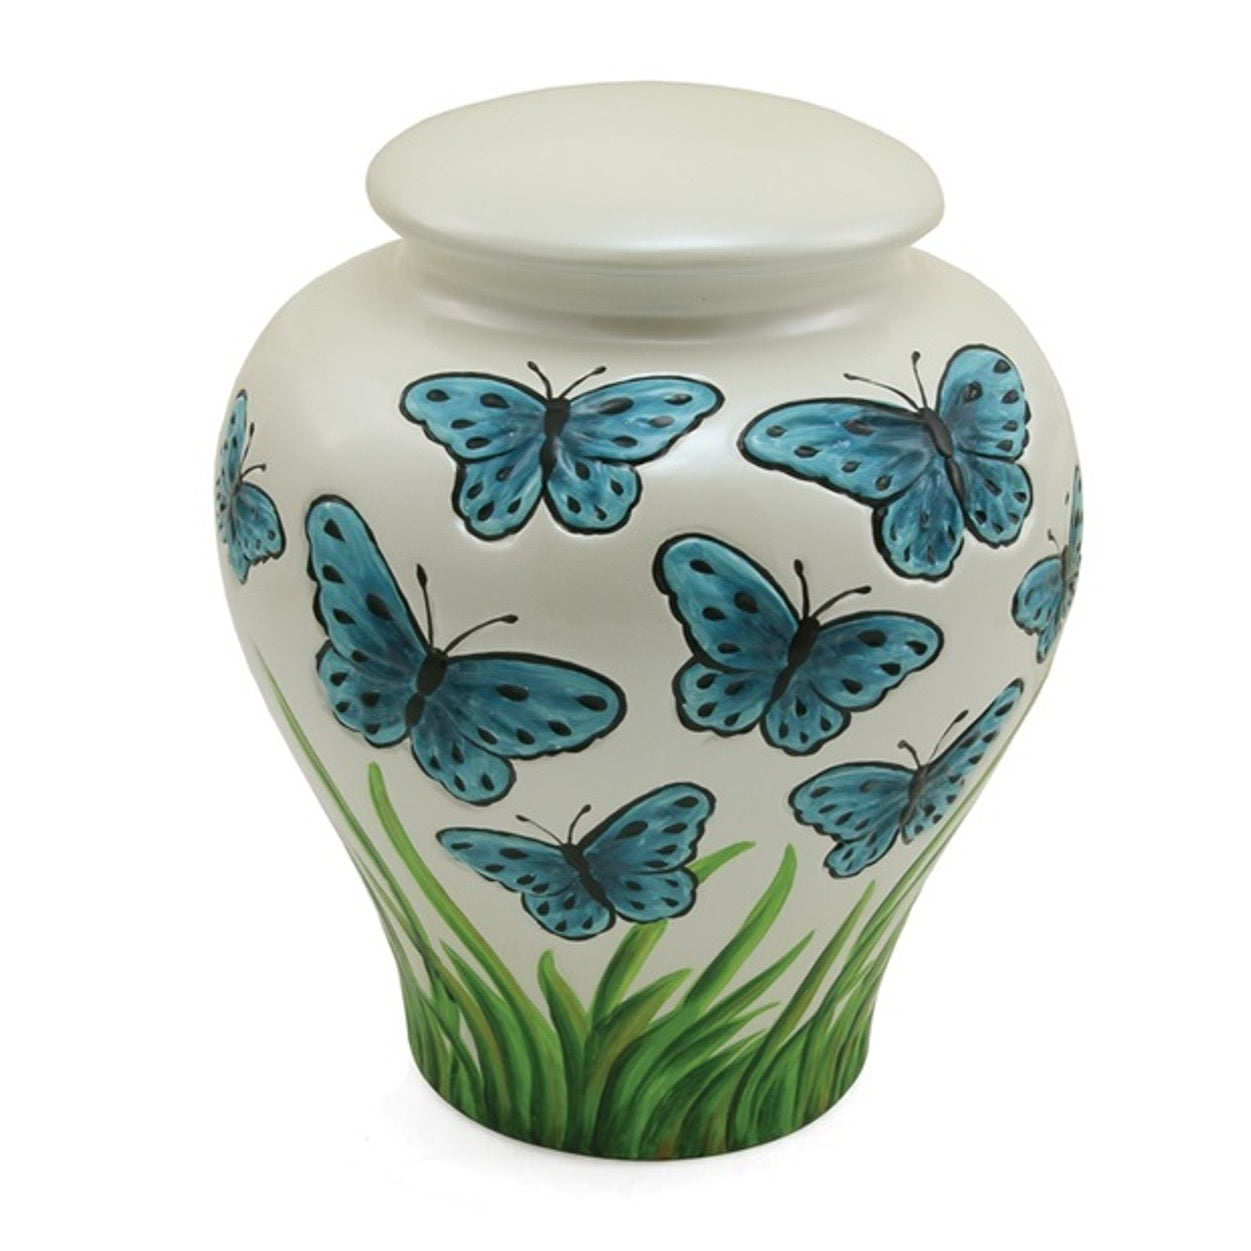 Blue butterflies on White Ceramic Urn with Grass on bottom